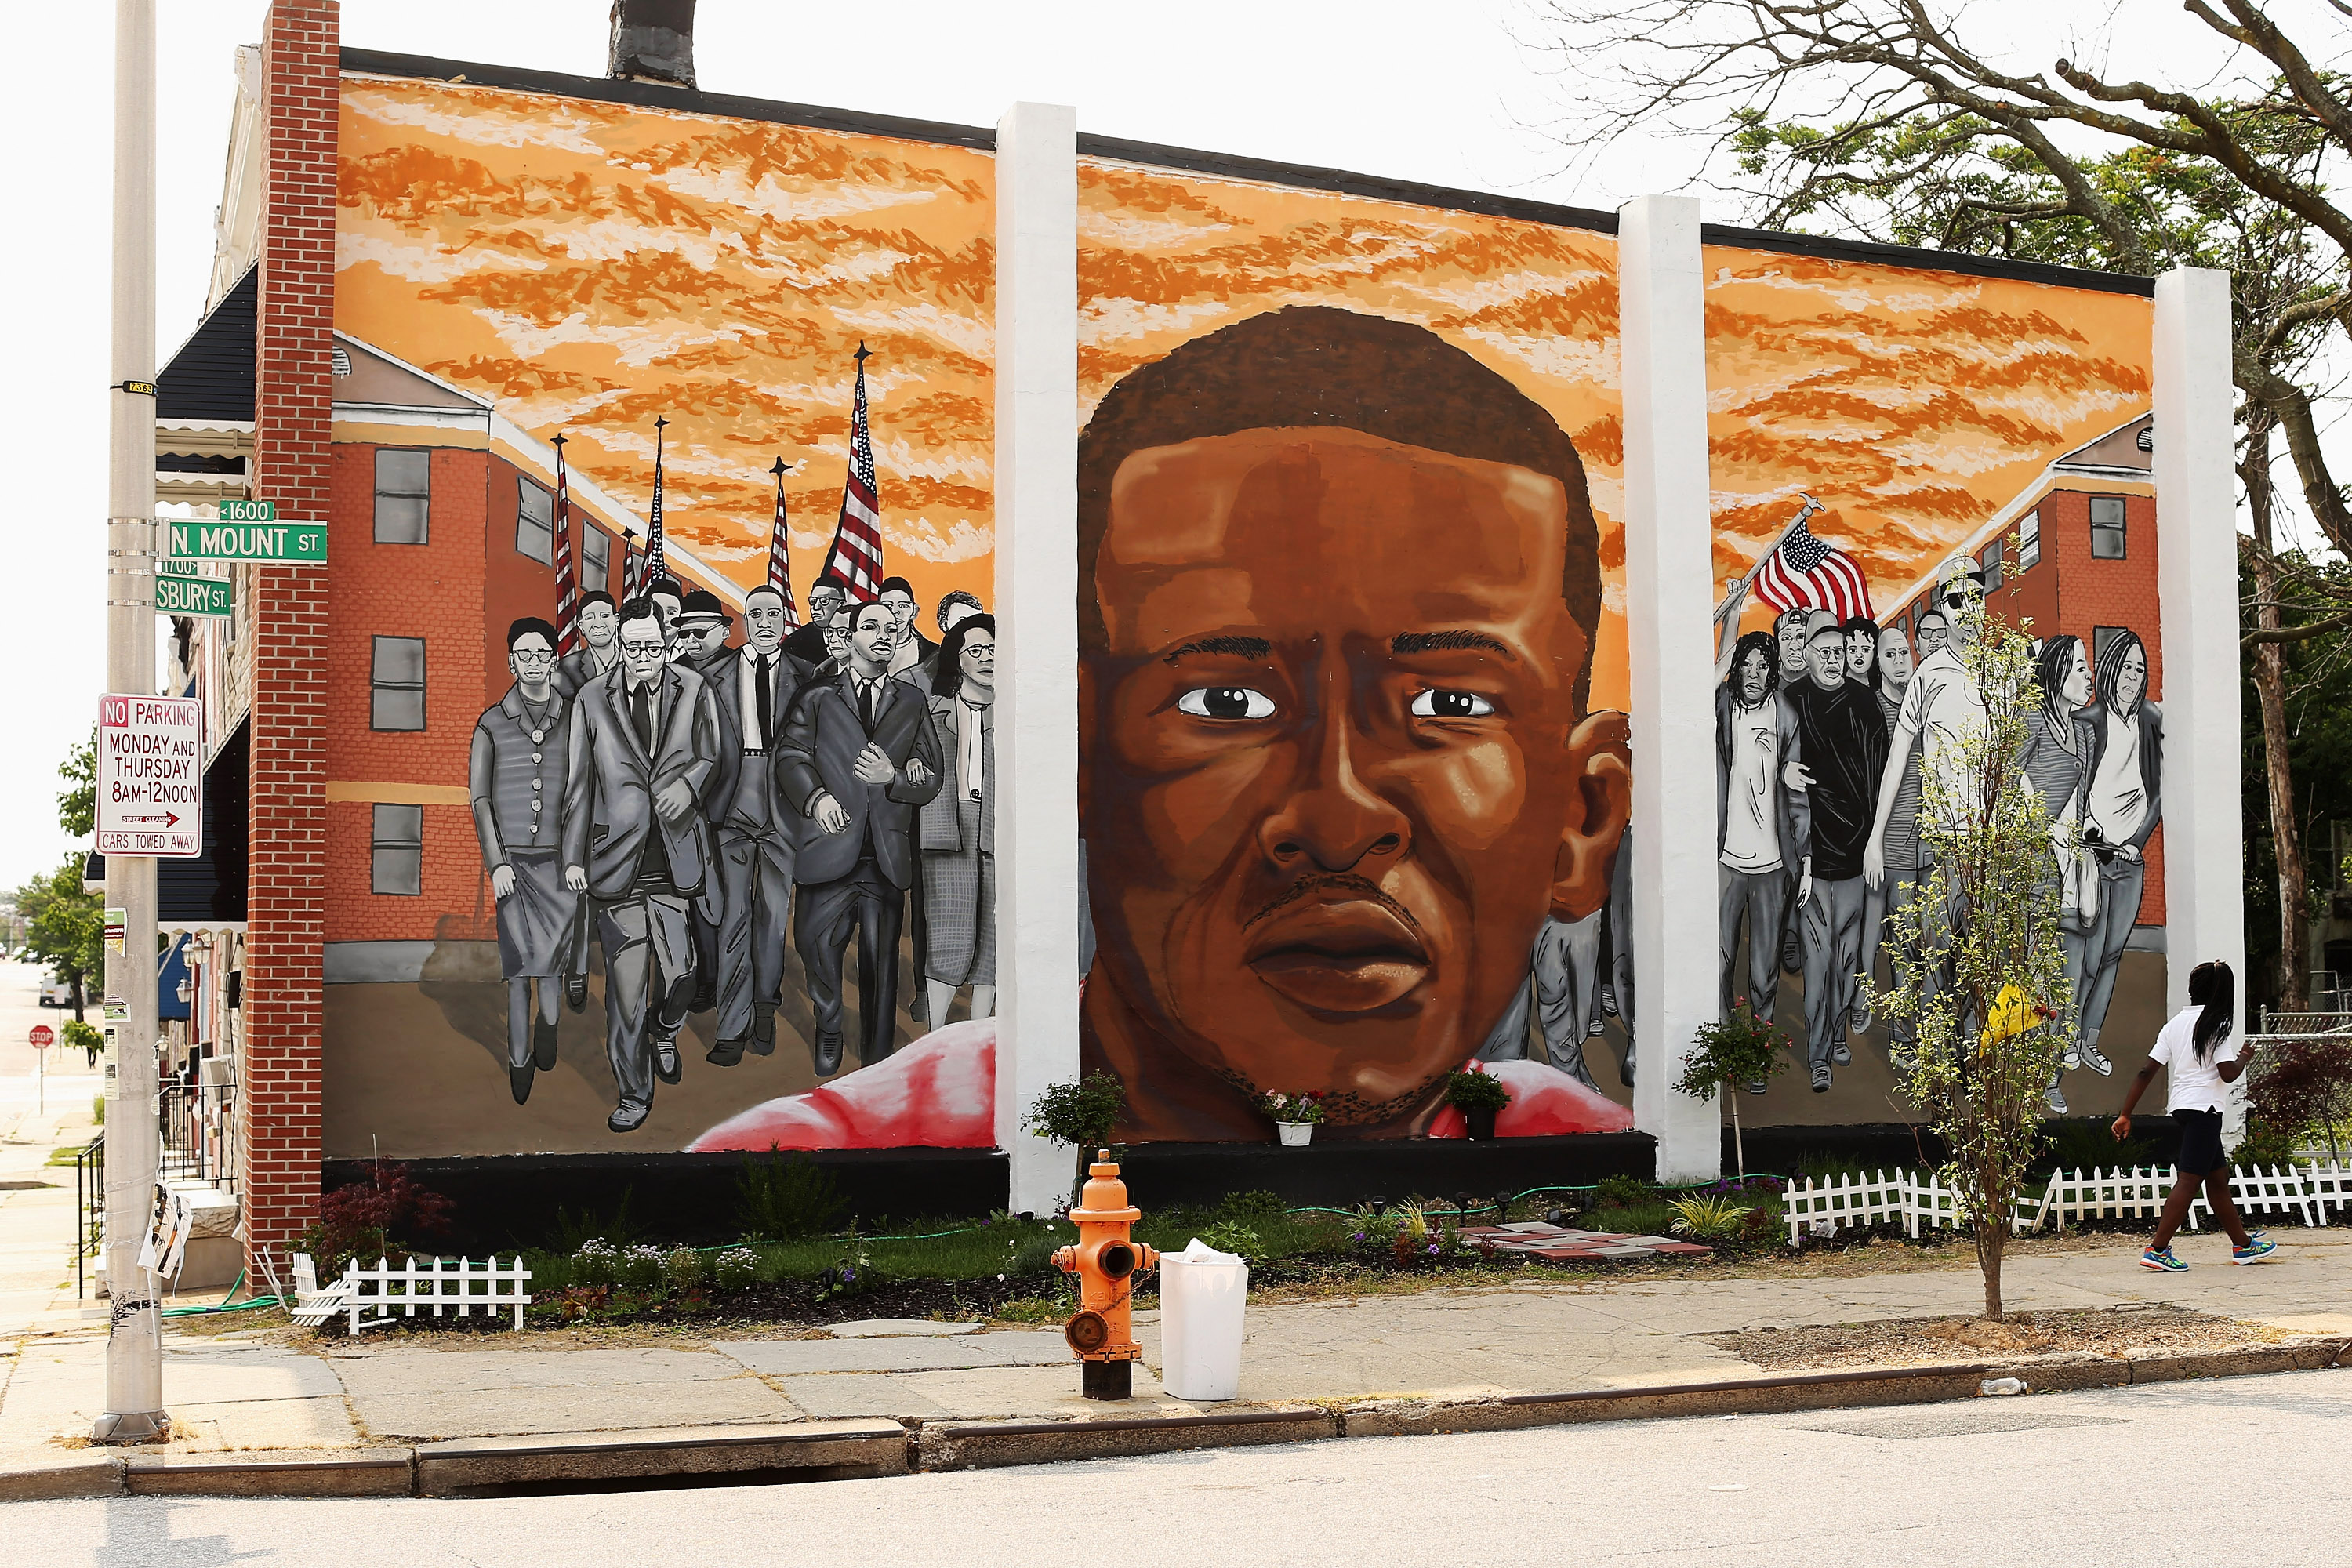 A mural memorializing Baltimore resident Freddie Gray is painted on the wall near the place where he was arrested by police at the Gilmor Homes housing project June 9, 2015 in Baltimore. (Chip Somodevilla—Getty Images)